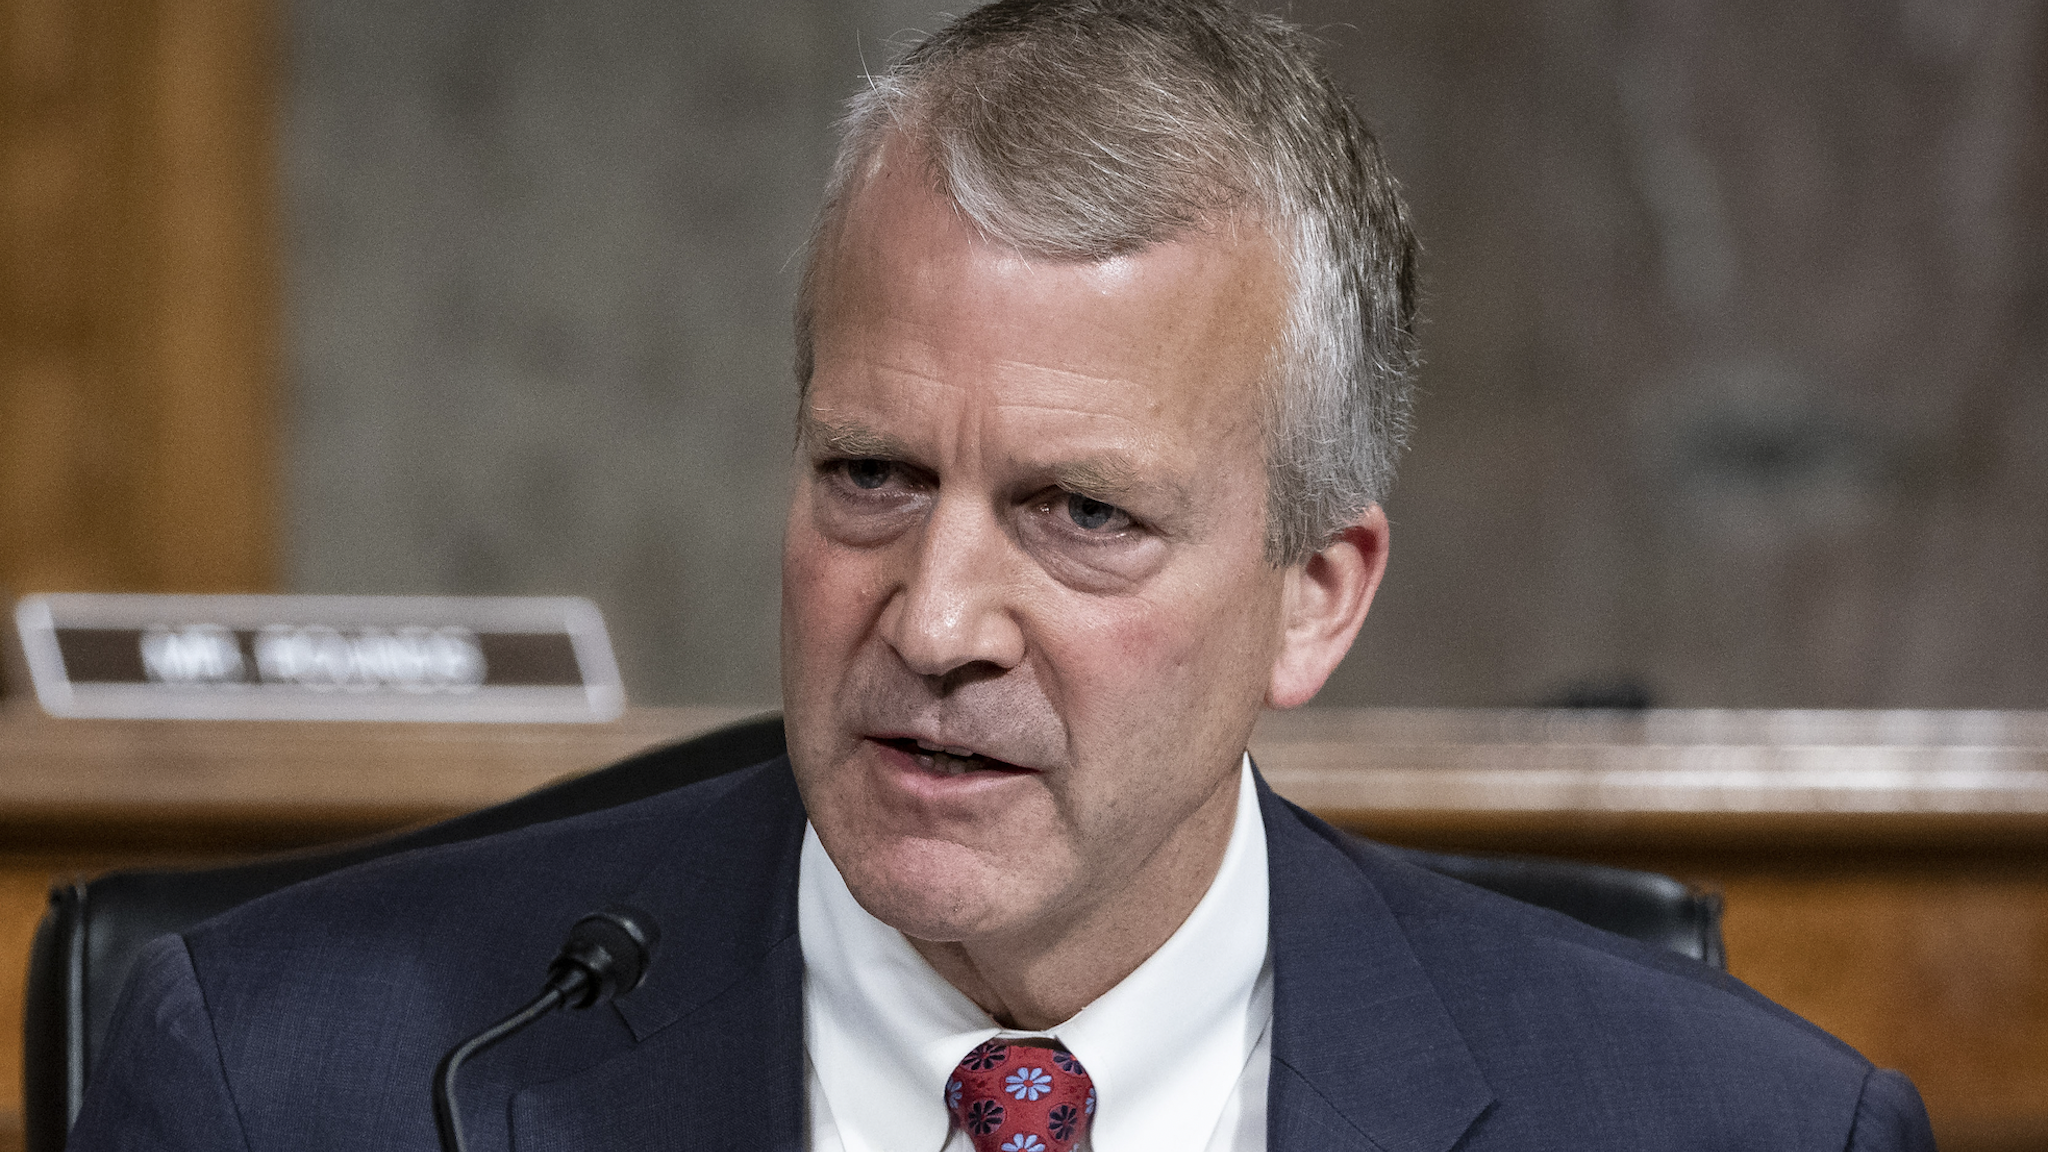 Senator Dan Sullivan, a Republican from Alaska, speaks during a Senate Armed Services Committee confirmation hearing for Kenneth Braithwaite, U.S. President Donald Trump's nominee for navy secretary, in Washington, D.C., U.S., on Thursday, May 7, 2020. Braithwaite told the Senate Armed Services Committee that the administration's goal of a 355-ship fleet over the next decade, up from 299 today, should be a minimum and "hopefully we build beyond that" despite budget constraints.